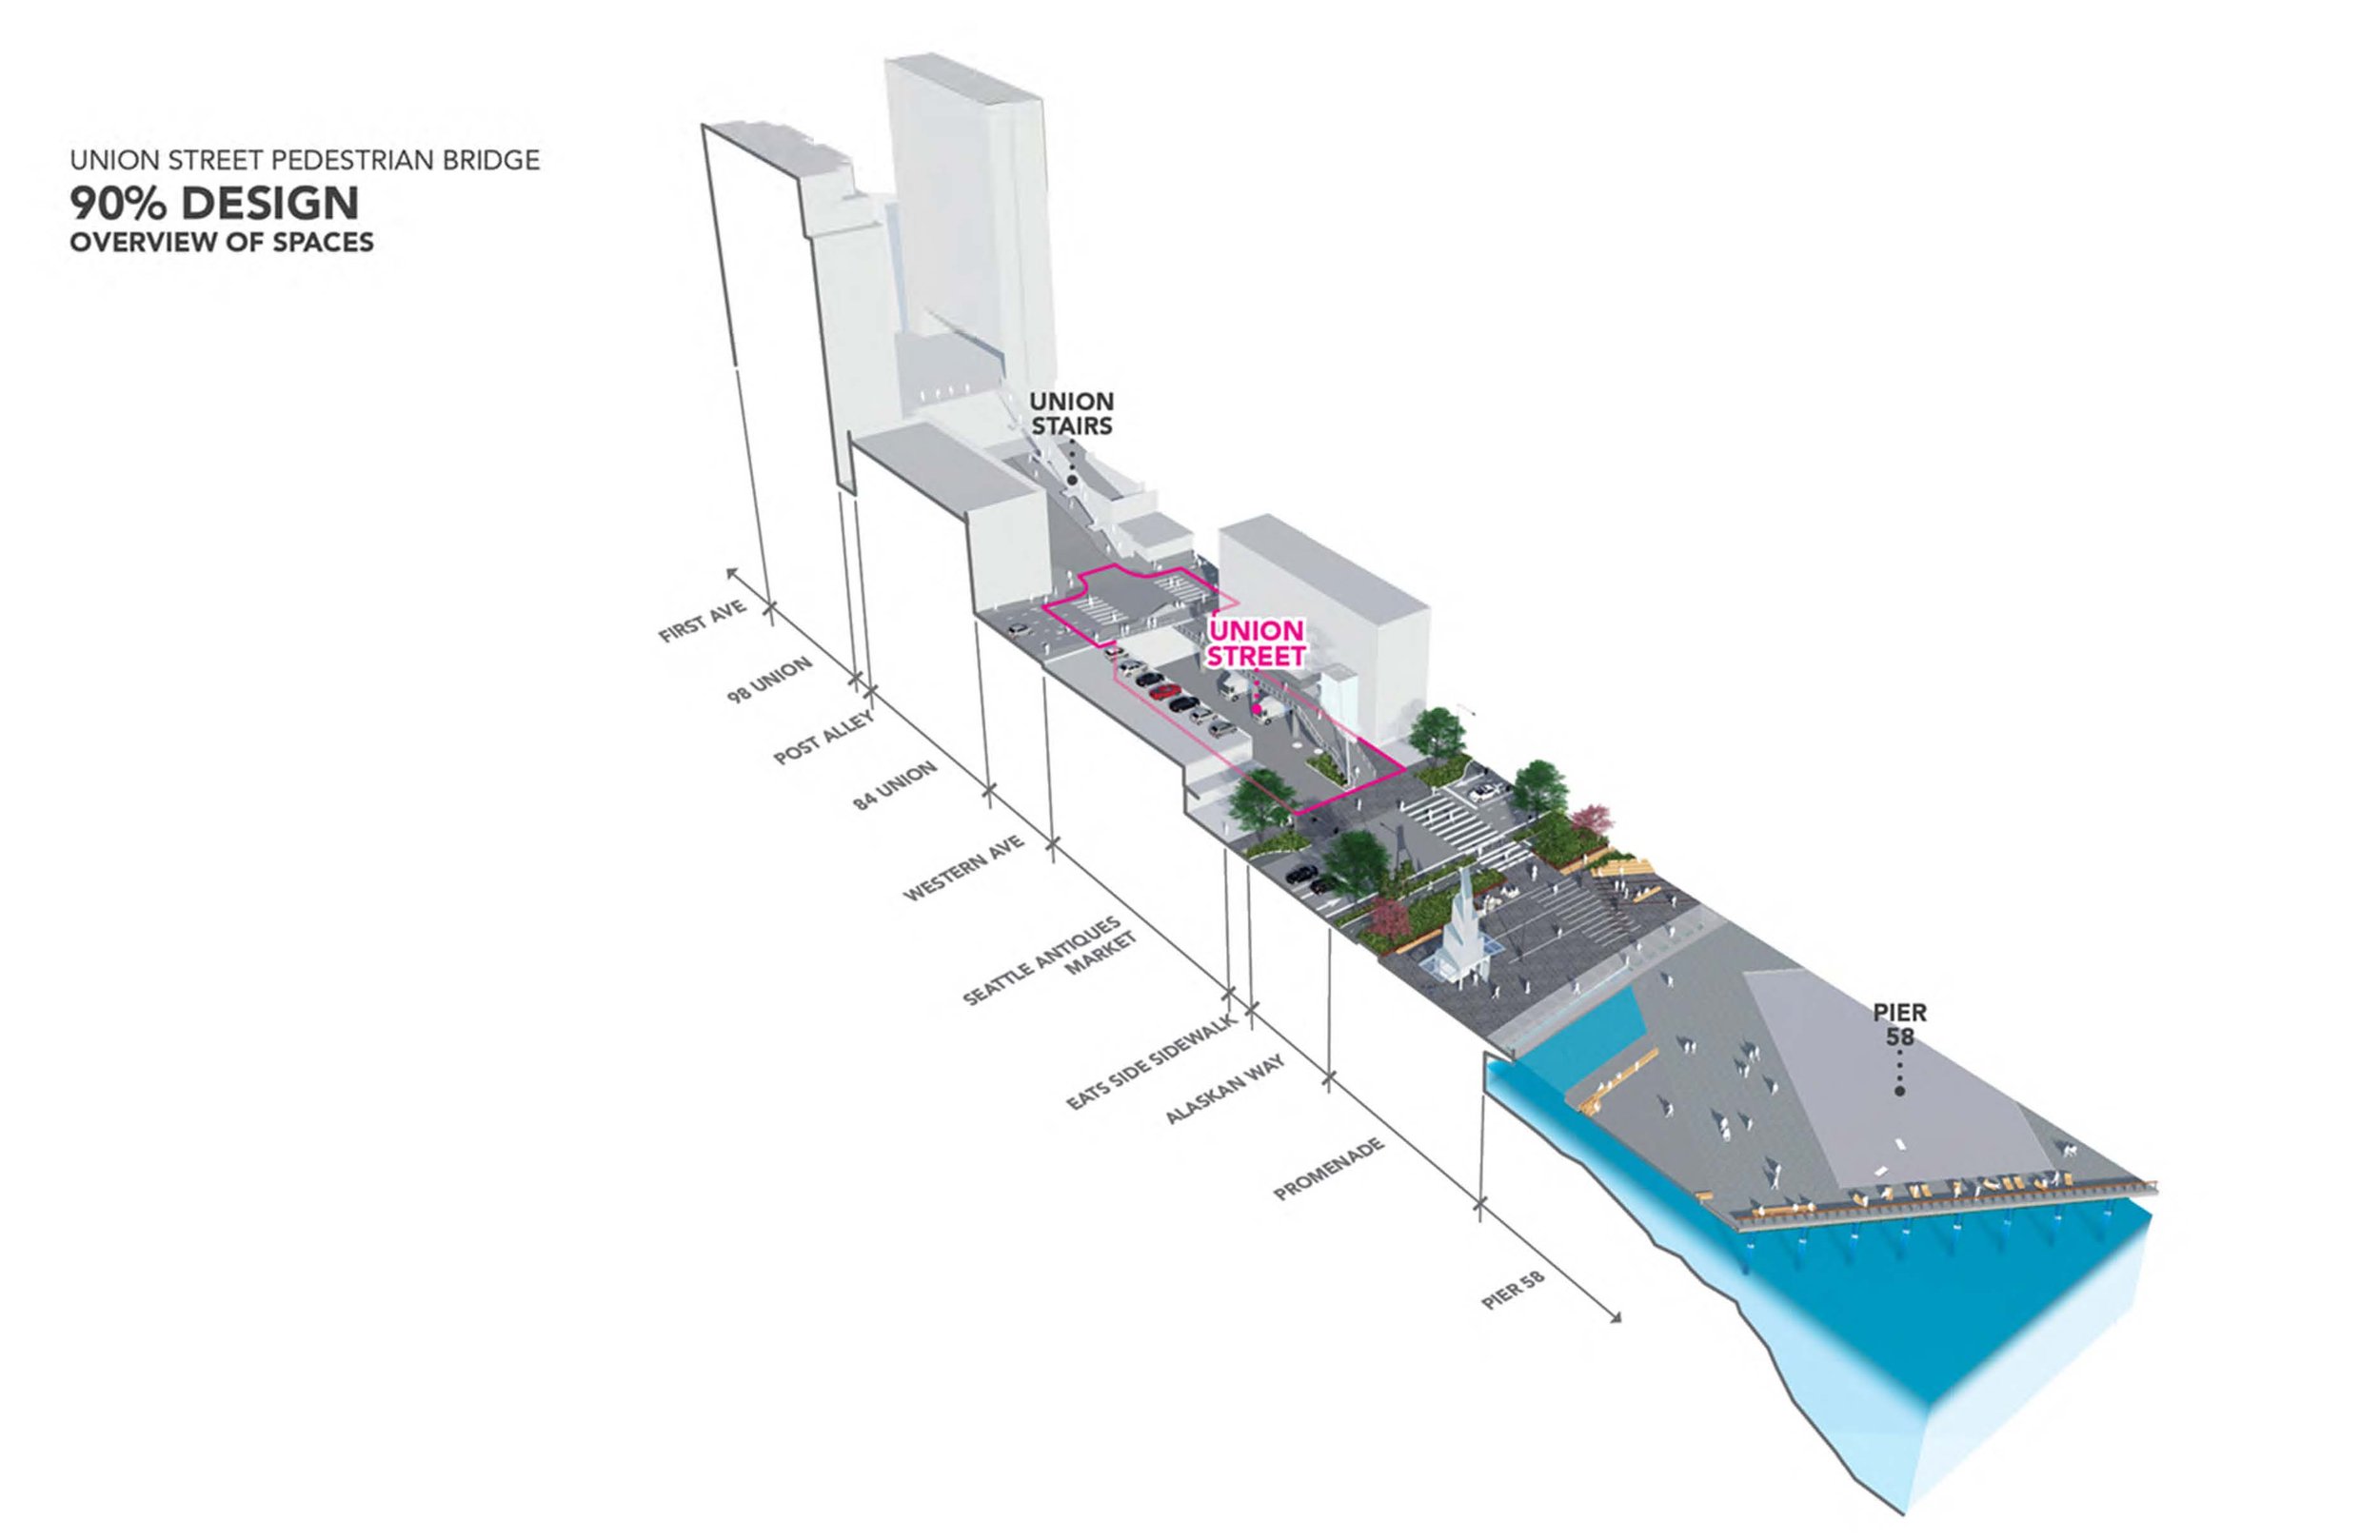 Pages from SeattleDesignCommission-2019.09.19WaterfrontUnionStpresentation.jpg